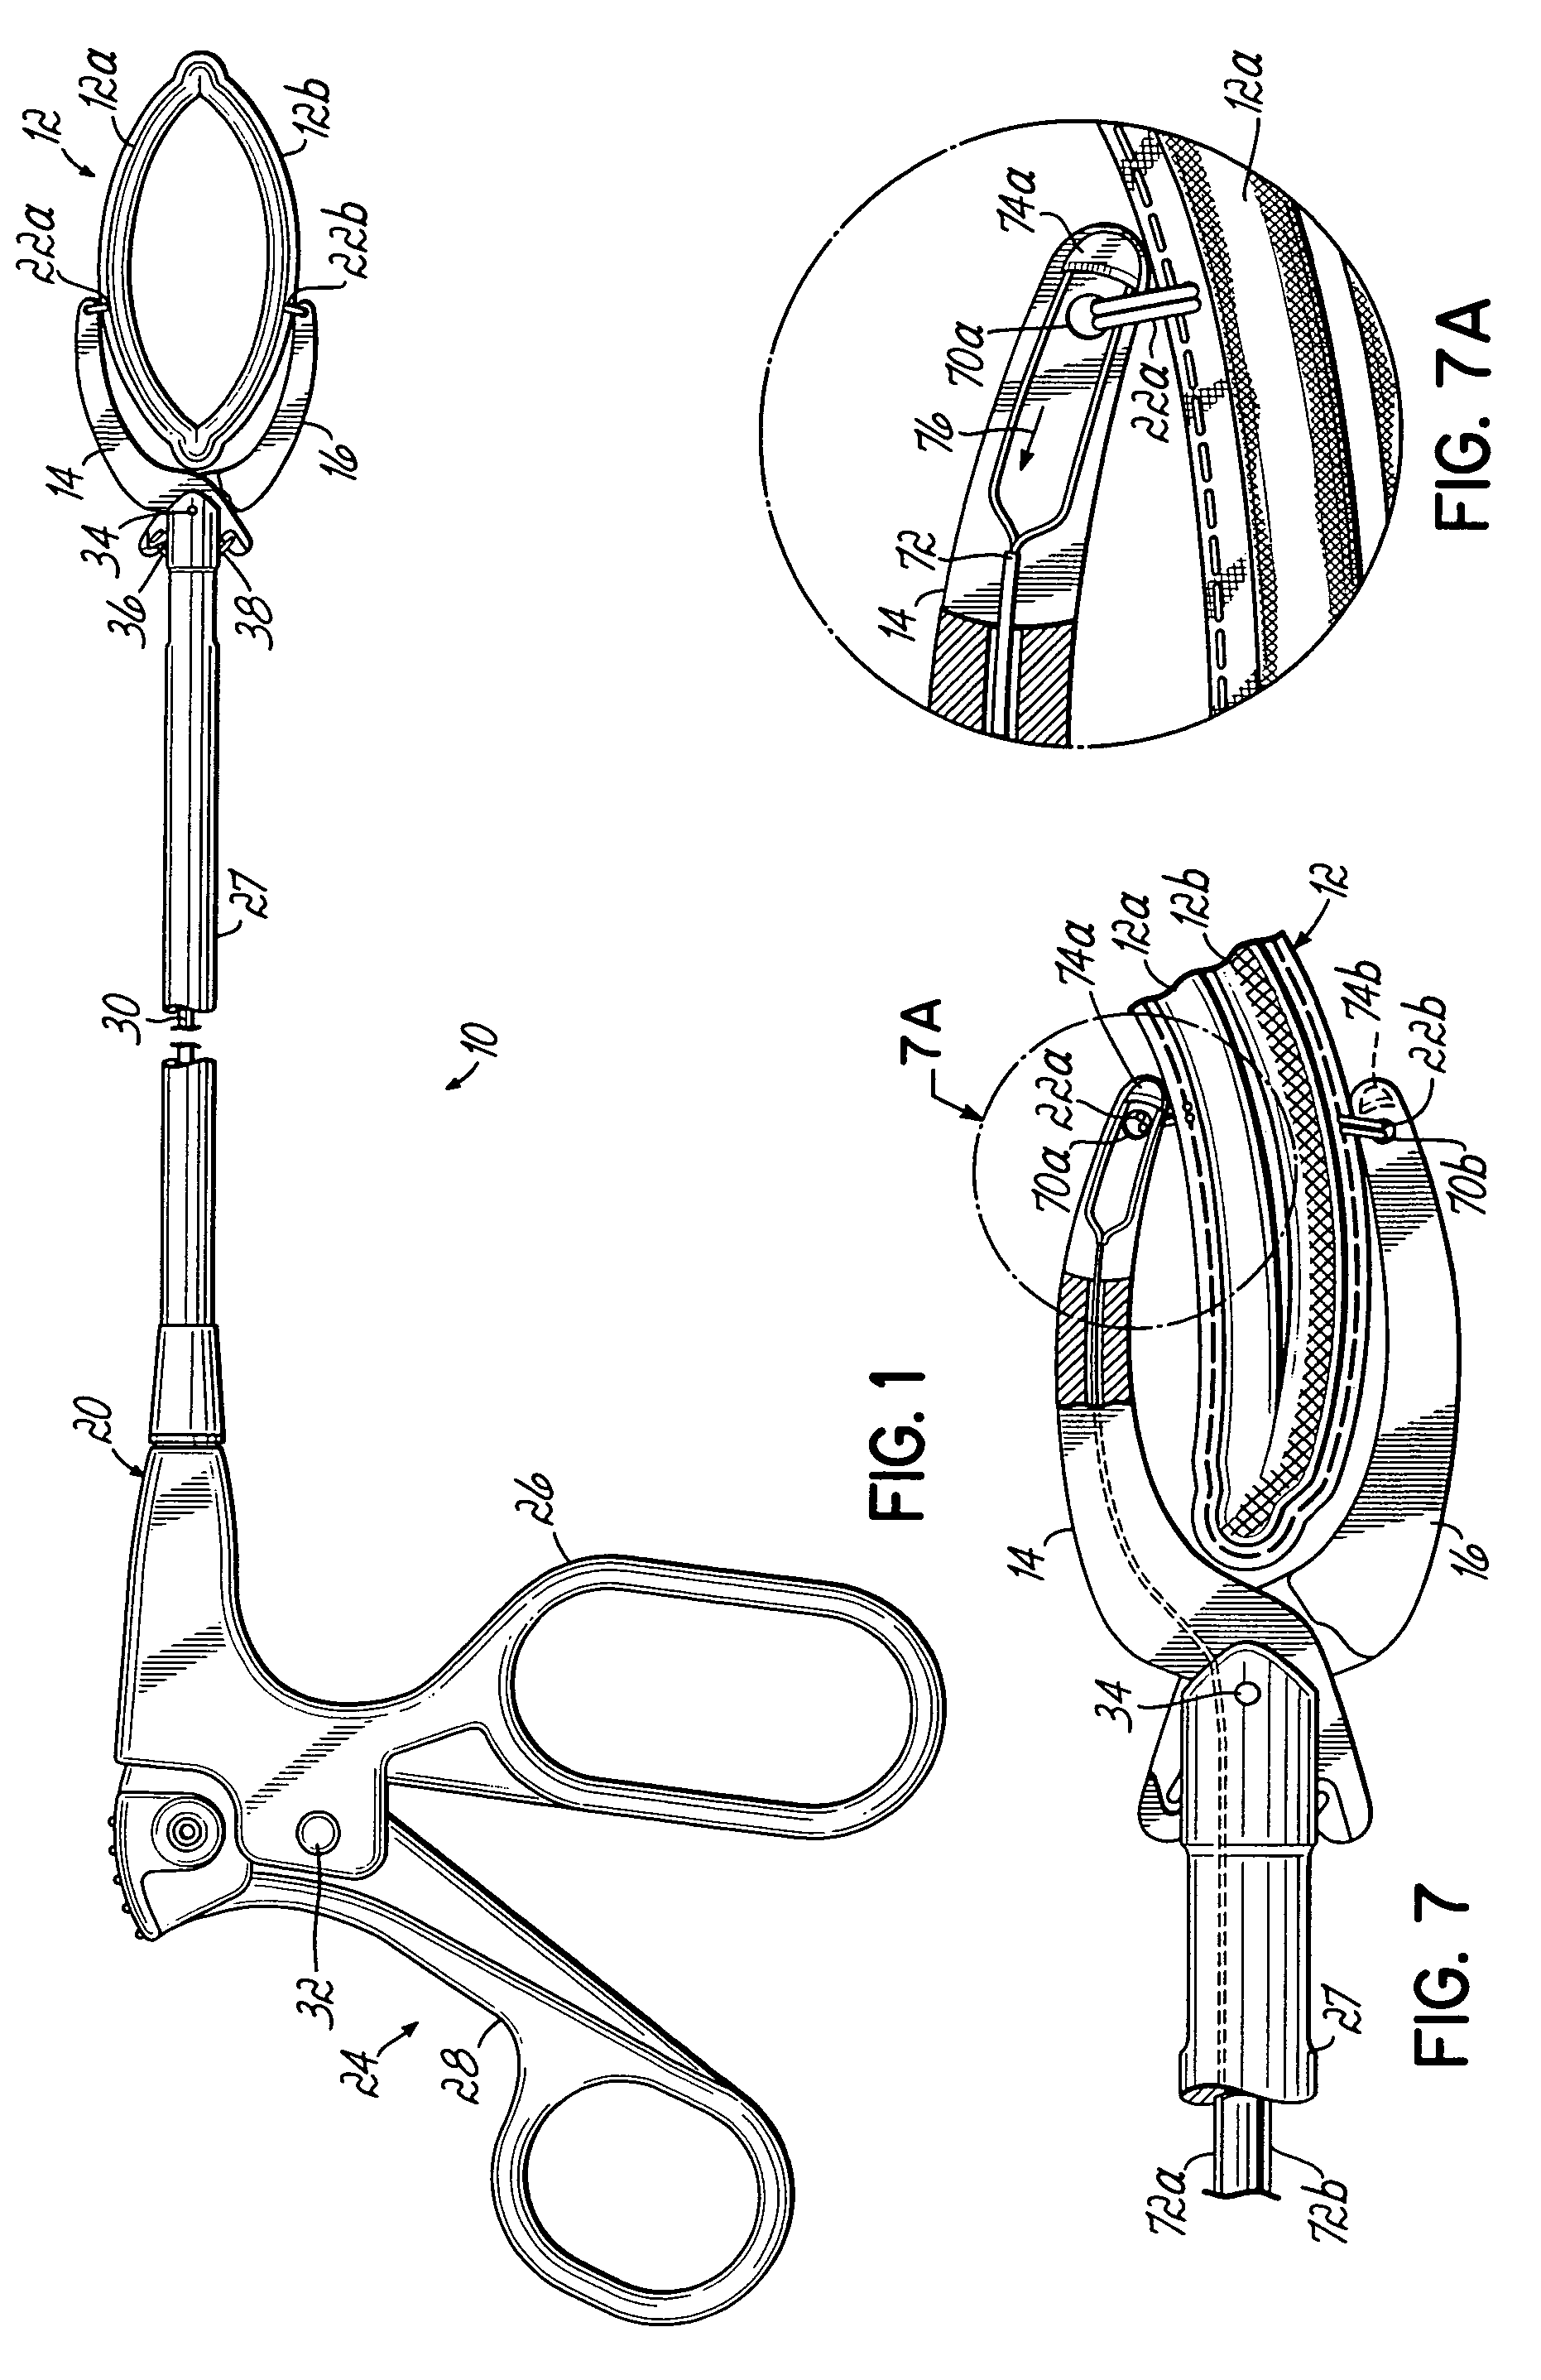 Apparatus and methods for occluding a hollow anatomical structure